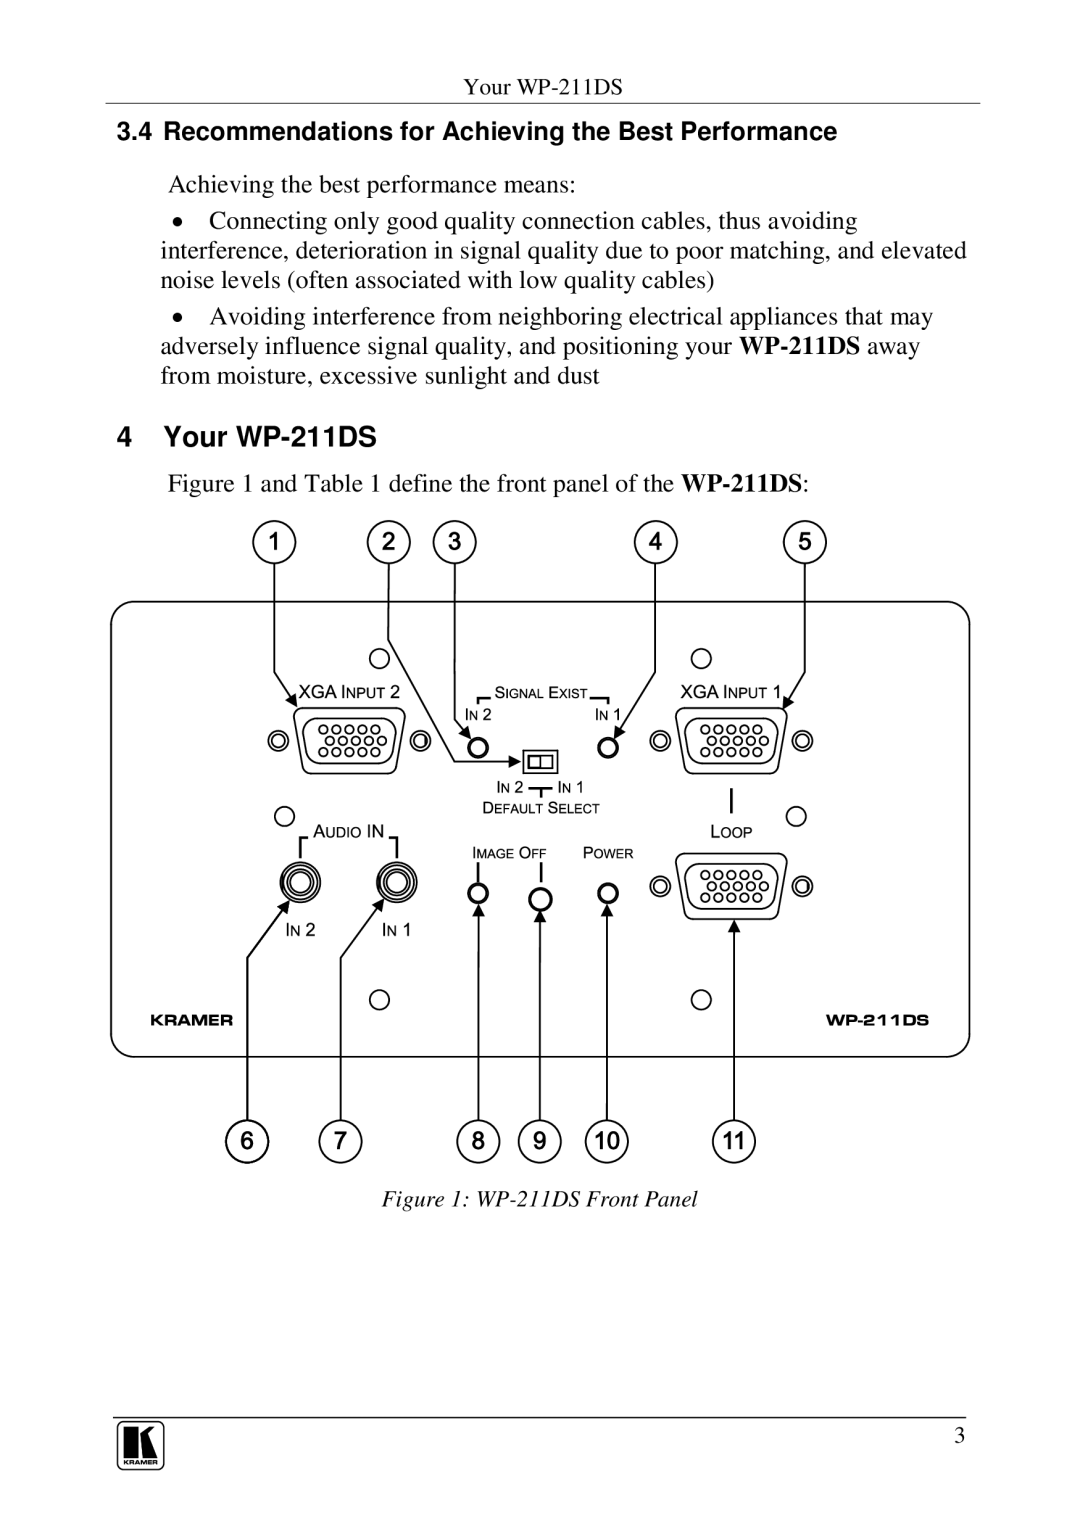 Kramer Electronics user manual Your WP-211DS, Recommendations for Achieving the Best Performance 